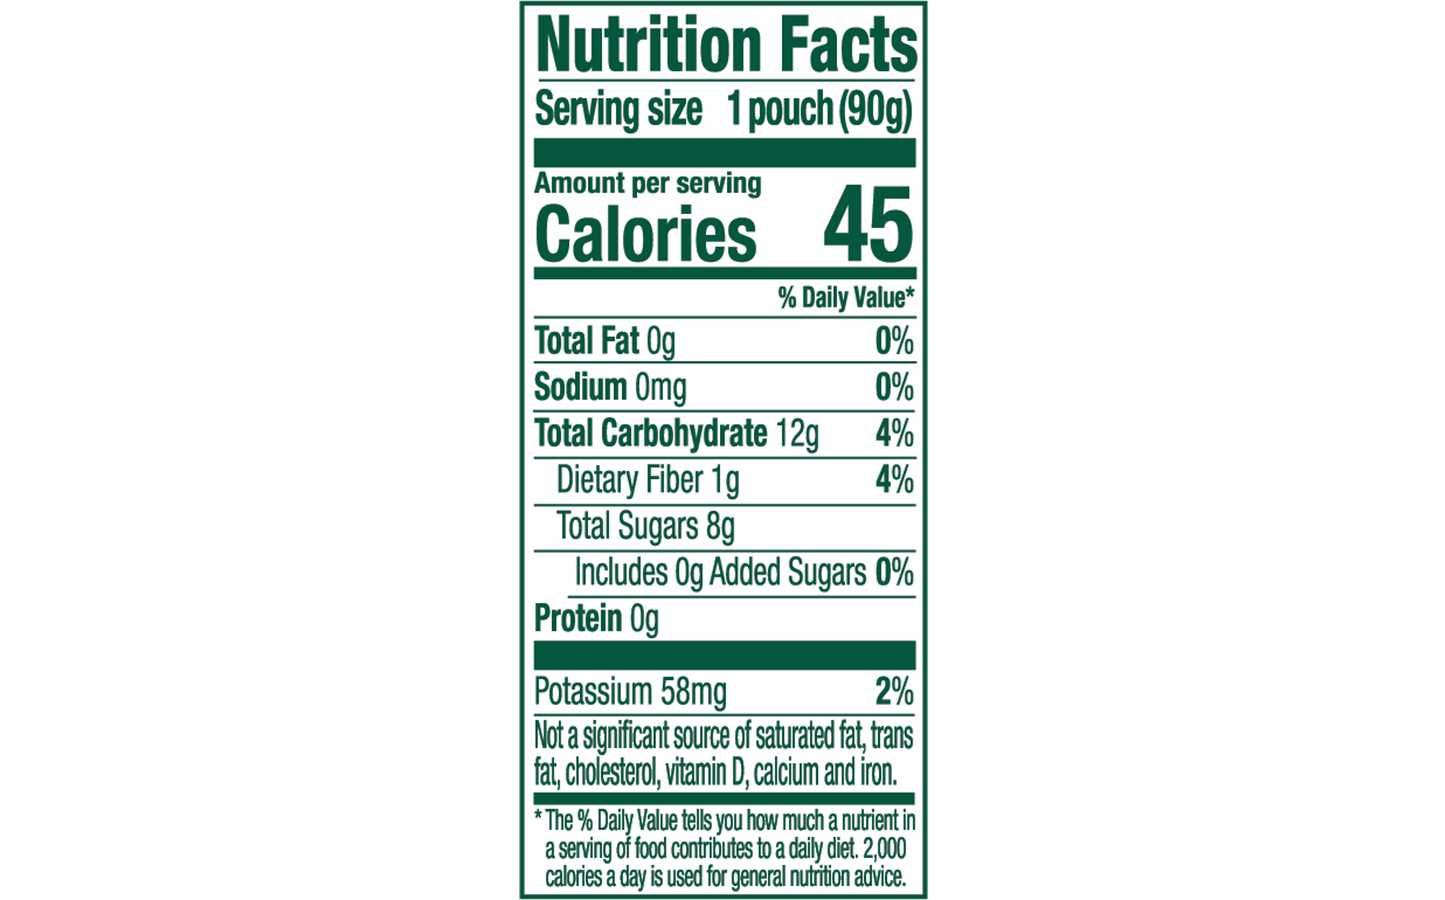 Nutrition facts for Buddy Fruits Apple Orchard fruit pouch.